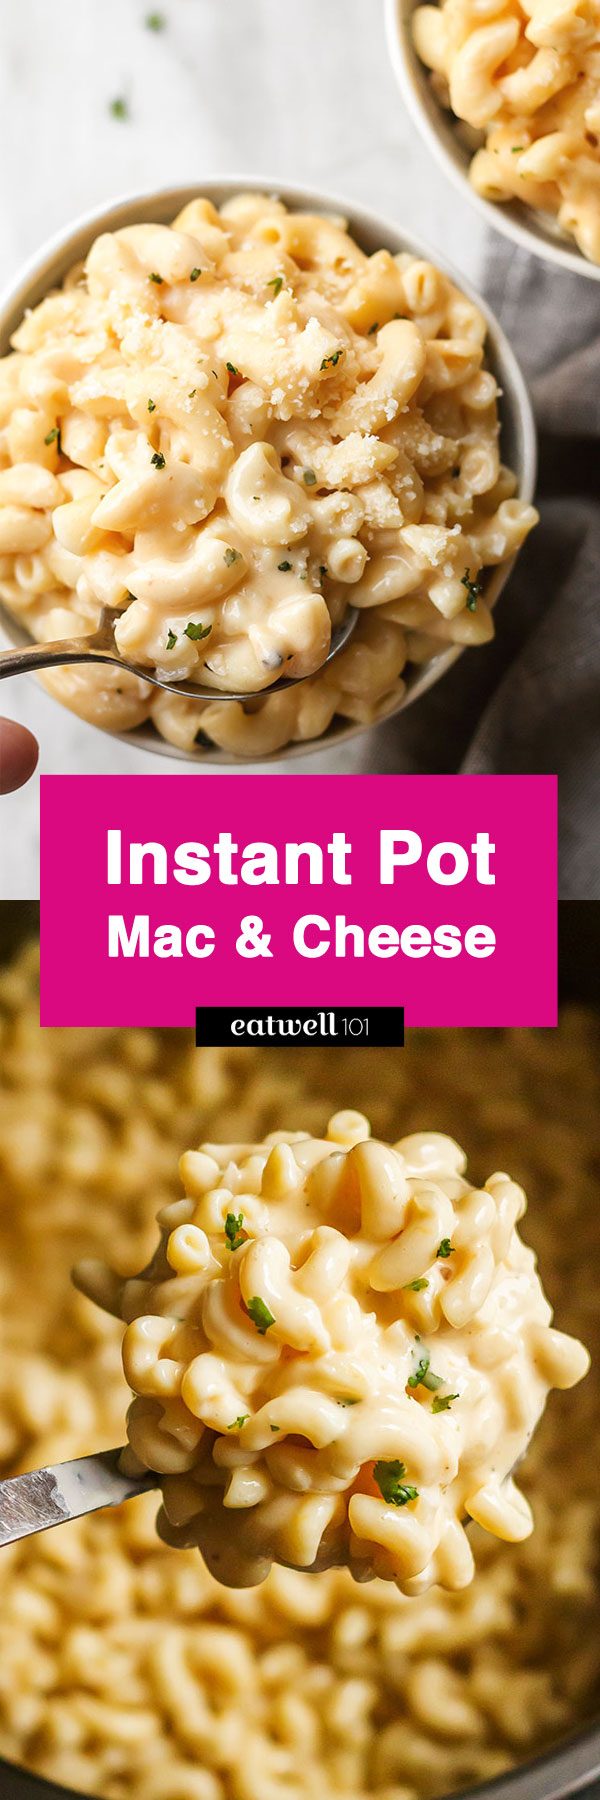 Instant Pot mac and cheese — Pure deliciousness, comfort and pleasure! Comfort food at its best for an instant dinner!